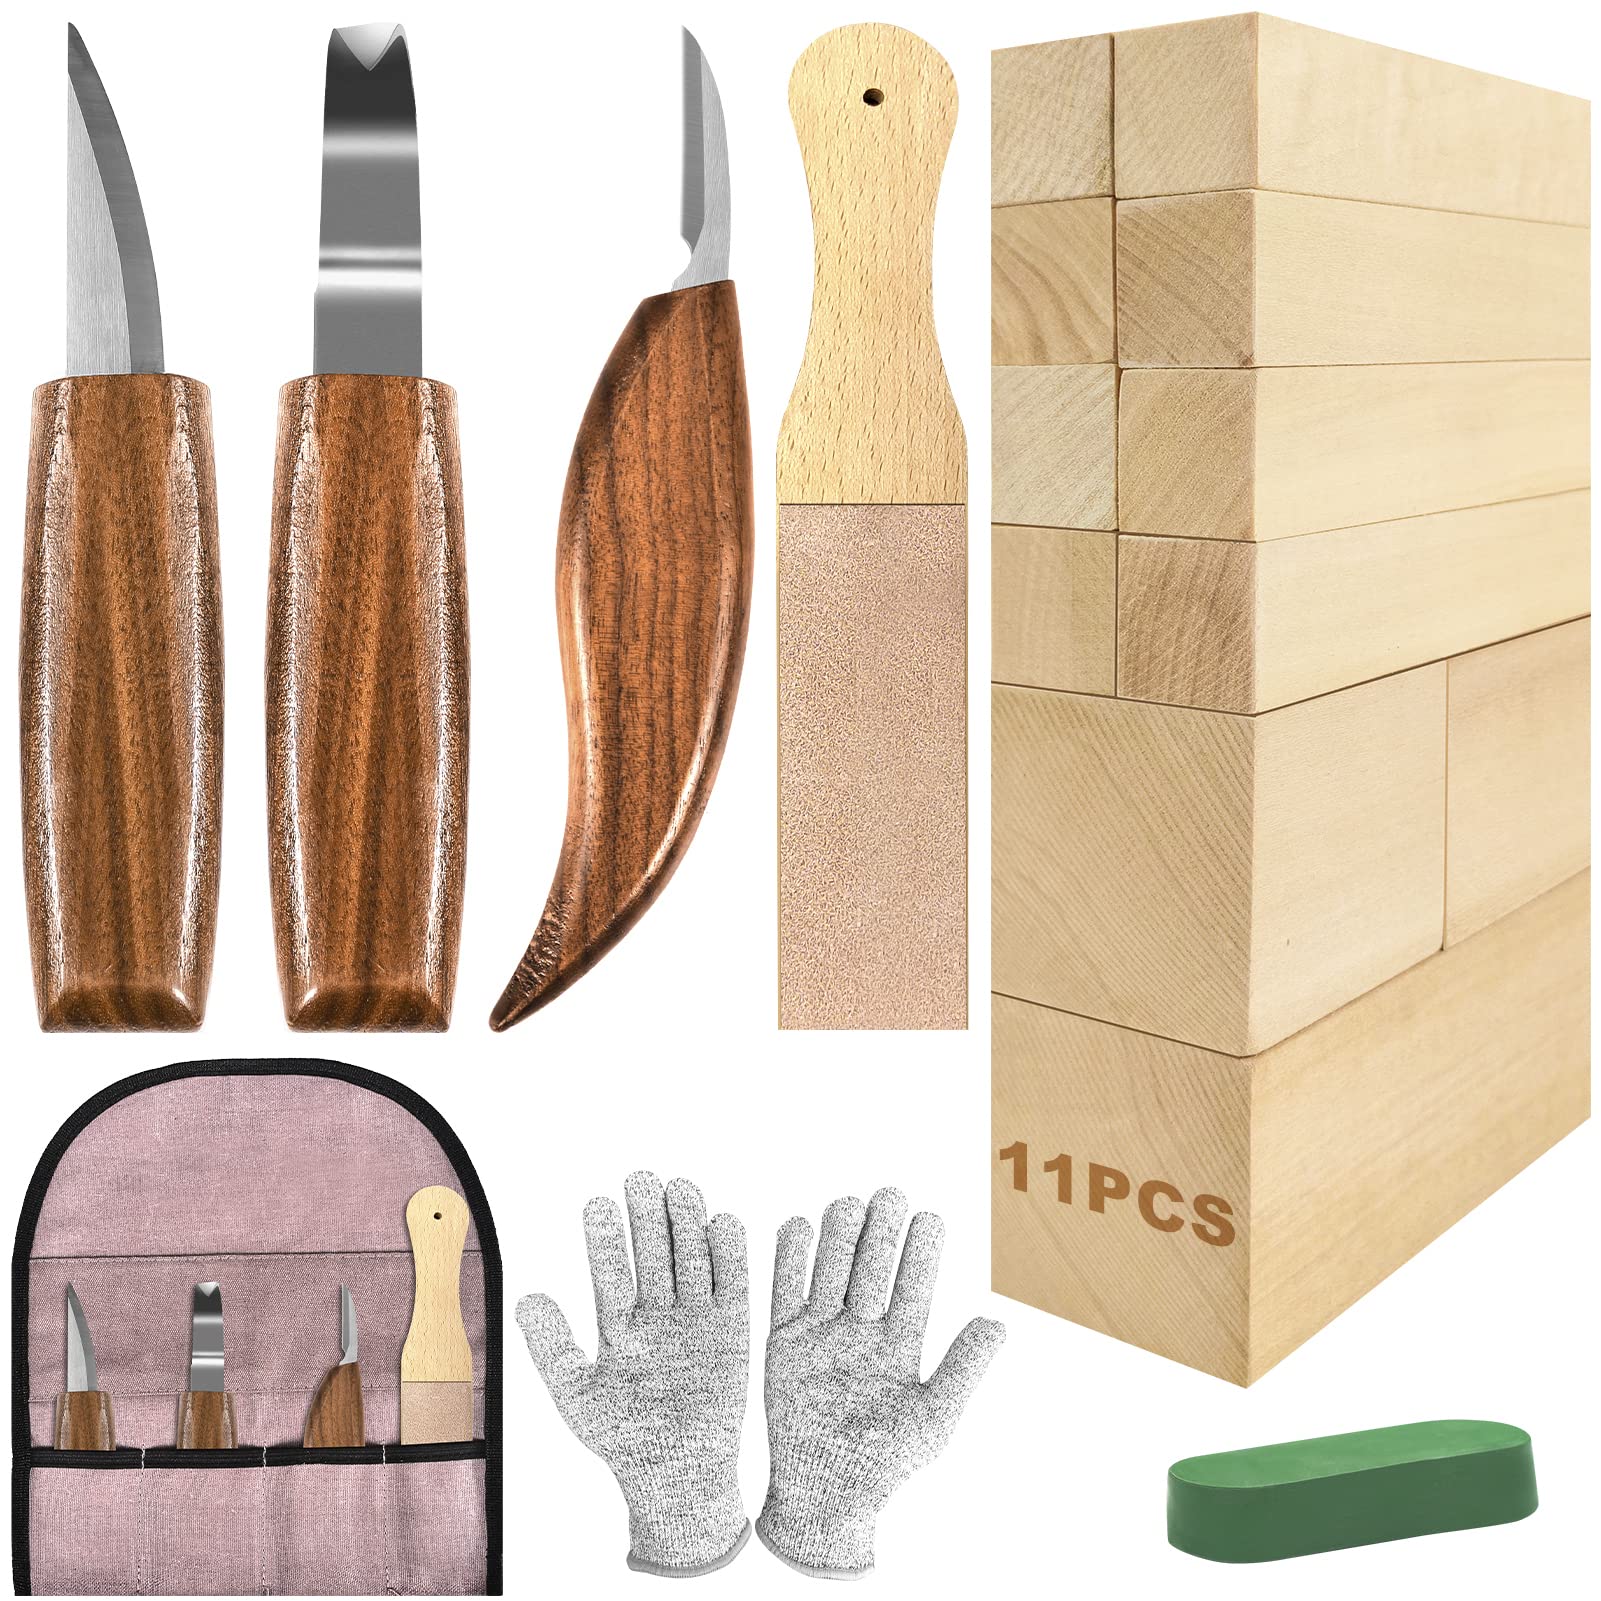 Wood Carving Kit Whittling Kit for Beginners 19PCS Wood Carving Tools with  3PCS Whittling Knife 11PCS Basswood Blocks & Gloves & Strop Block &  Polishing Compound Wood Carving Set Hobbies for Adults